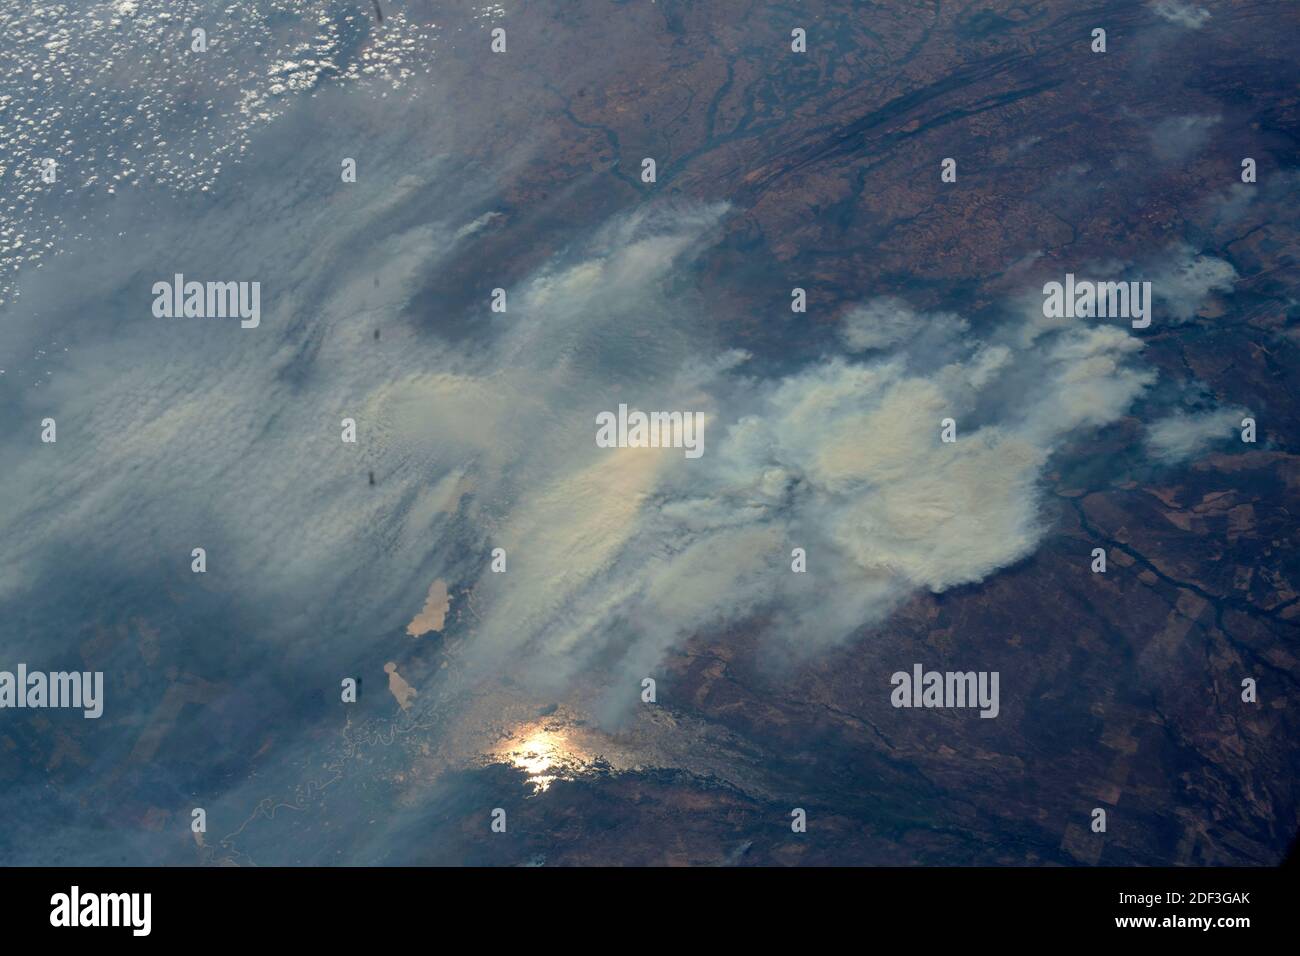 BRAZIL / BOLIVIA - 29 August 2020 - Wildfires are pictured in the Amazon rainforest as the International Space Station orbited above the border betwee Stock Photo